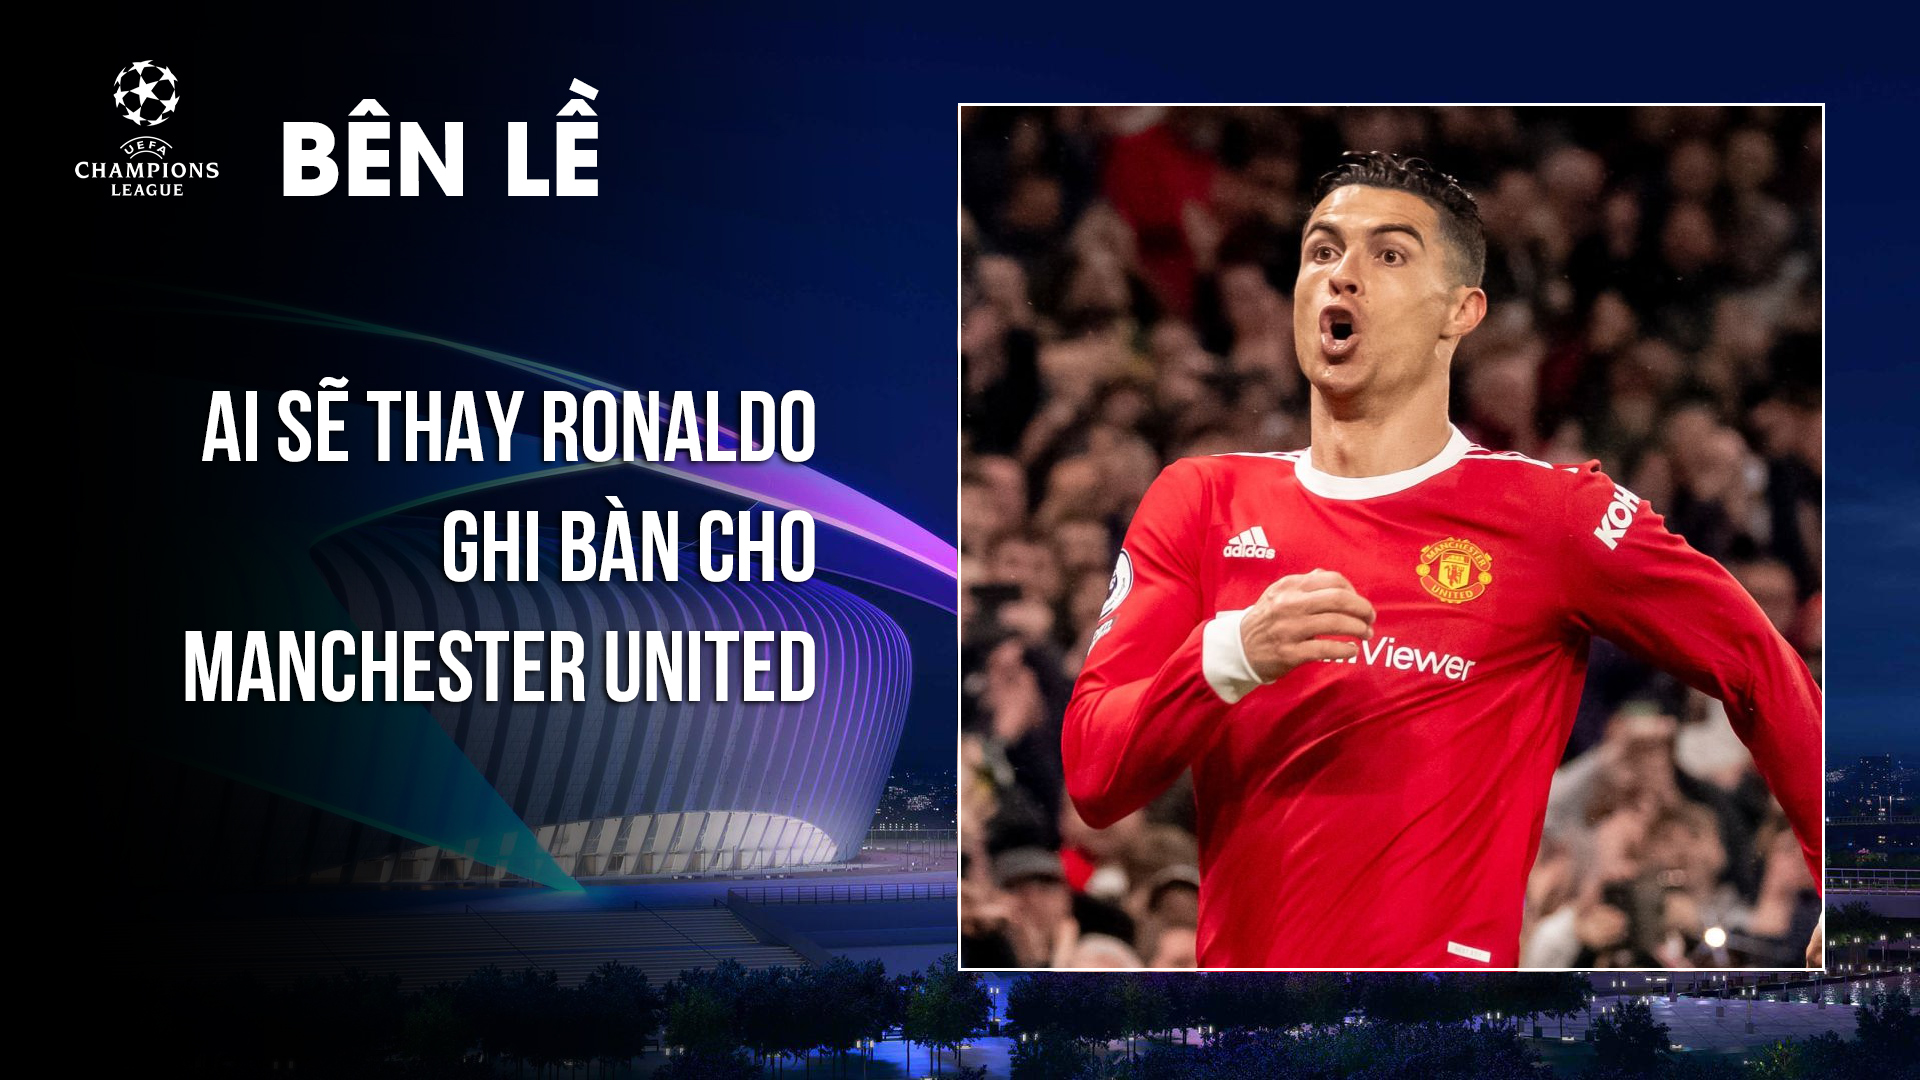 Ai sẽ thay Ronaldo ghi bàn cho Manchester United? - Who will replace Ronaldo to score for Manchester United?